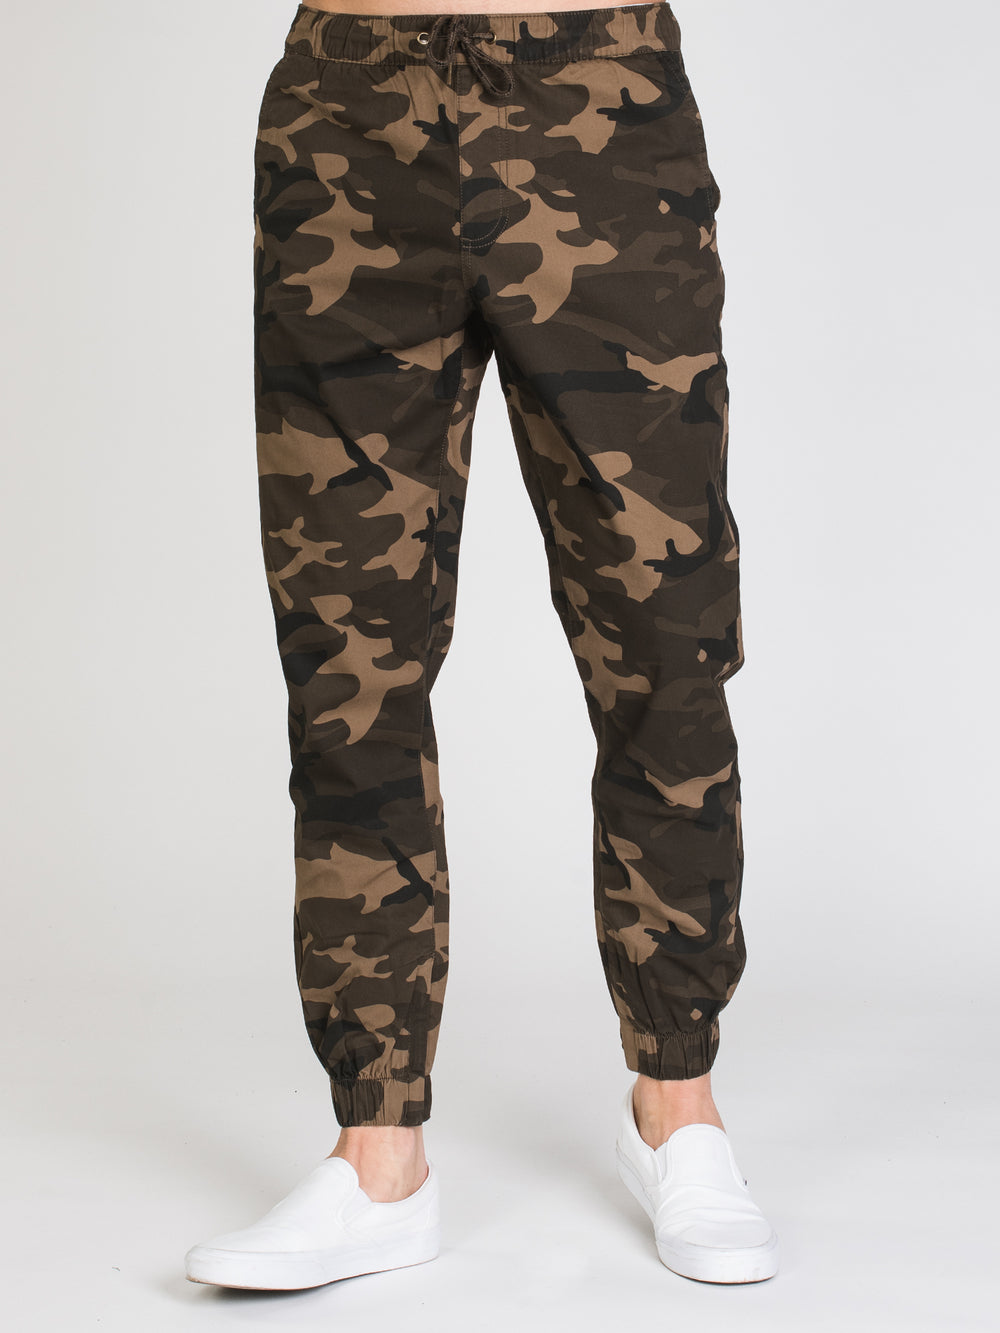 TAINTED CROCKETT RUGBY JOGGER - CAMO - CLEARANCE